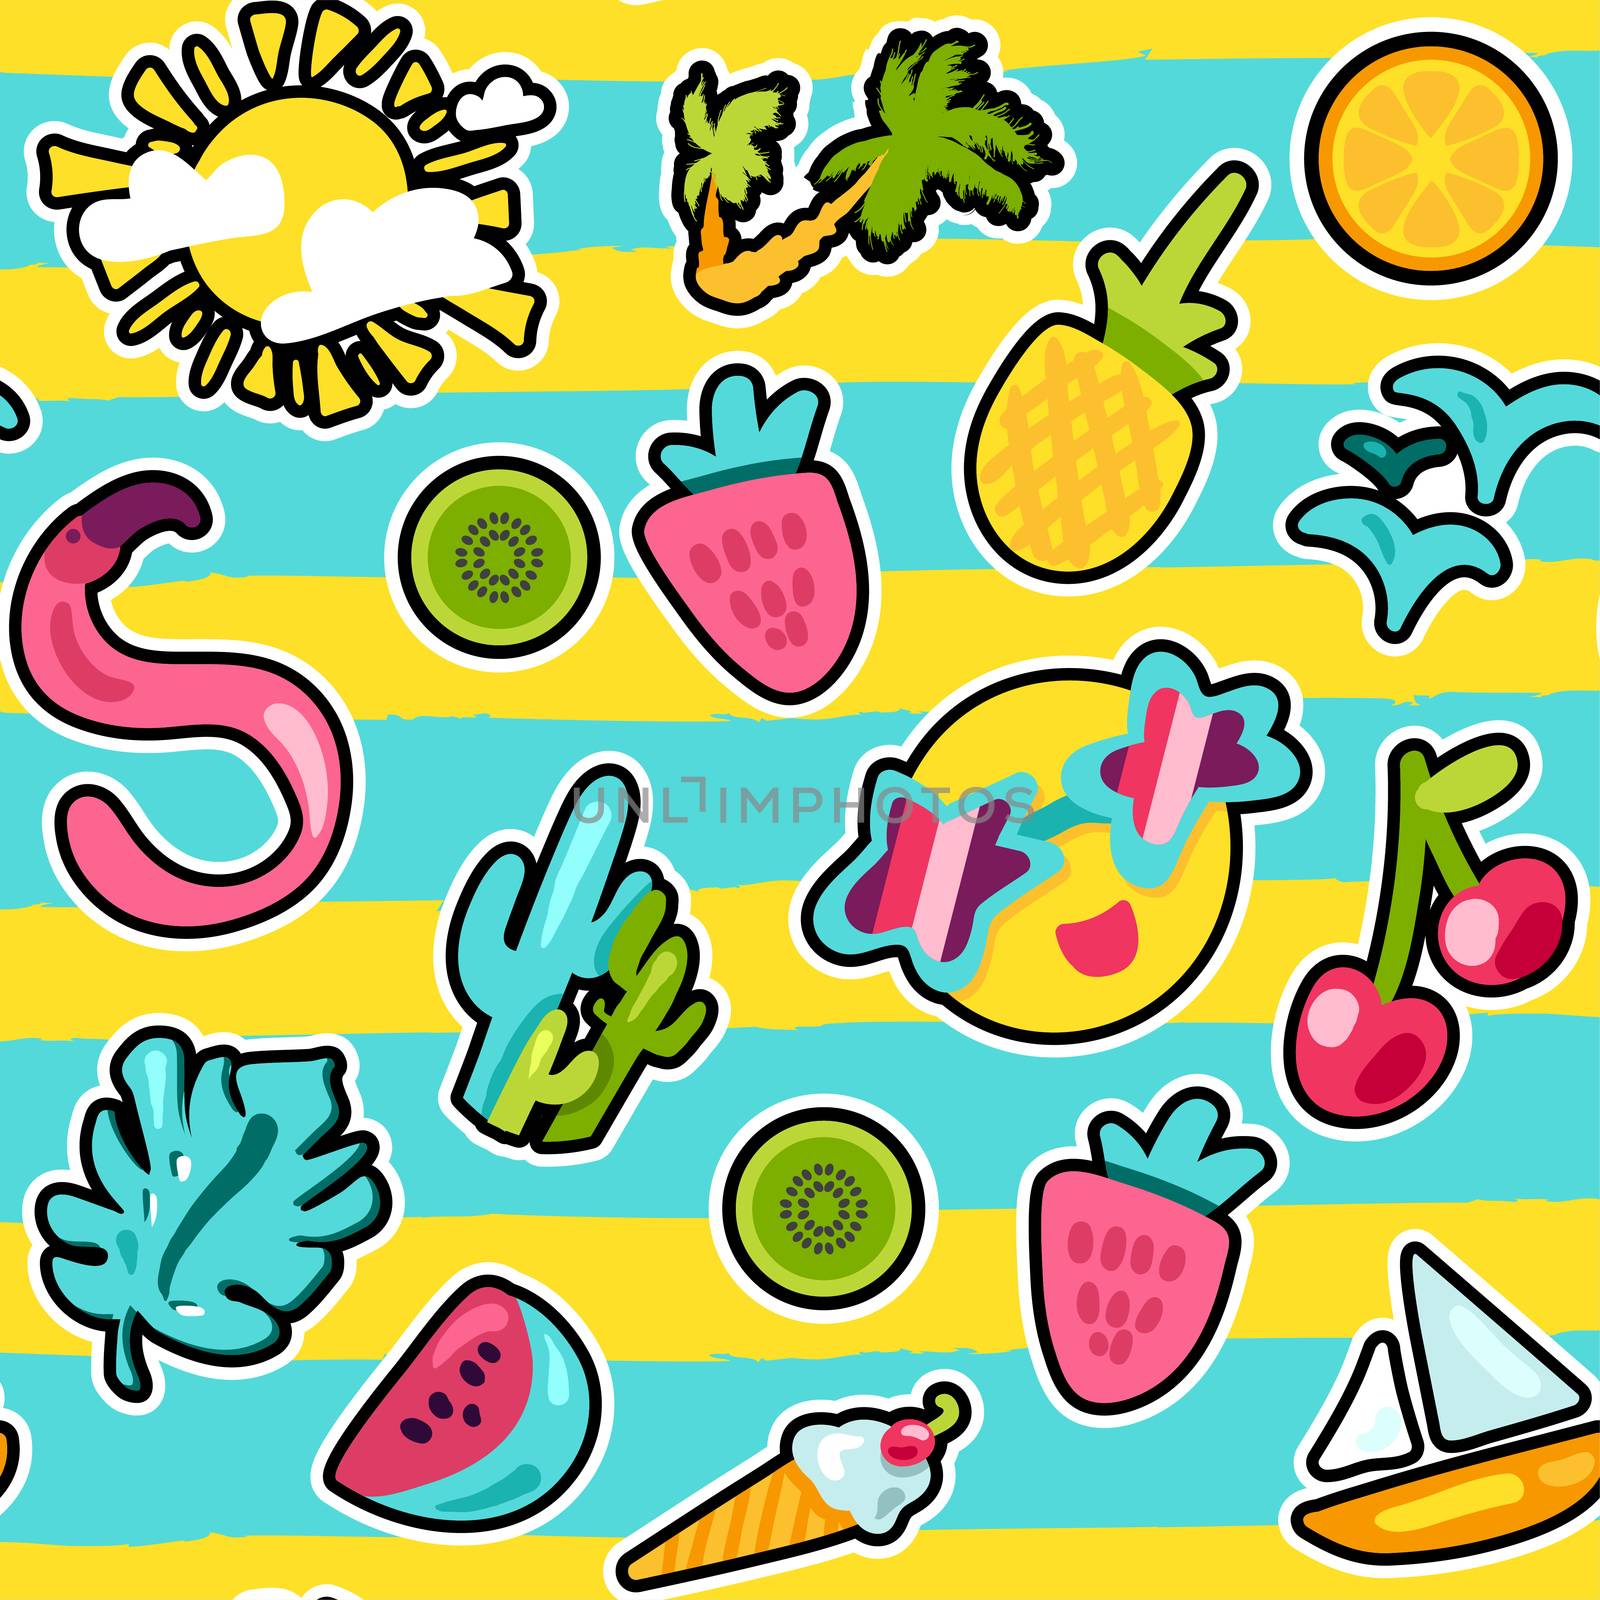 Vector Exotic Summer Seamless Pattern with shape. Fruits and berries. Girl fashion sweet ornament design. Beach cartoon background. Hot wrap